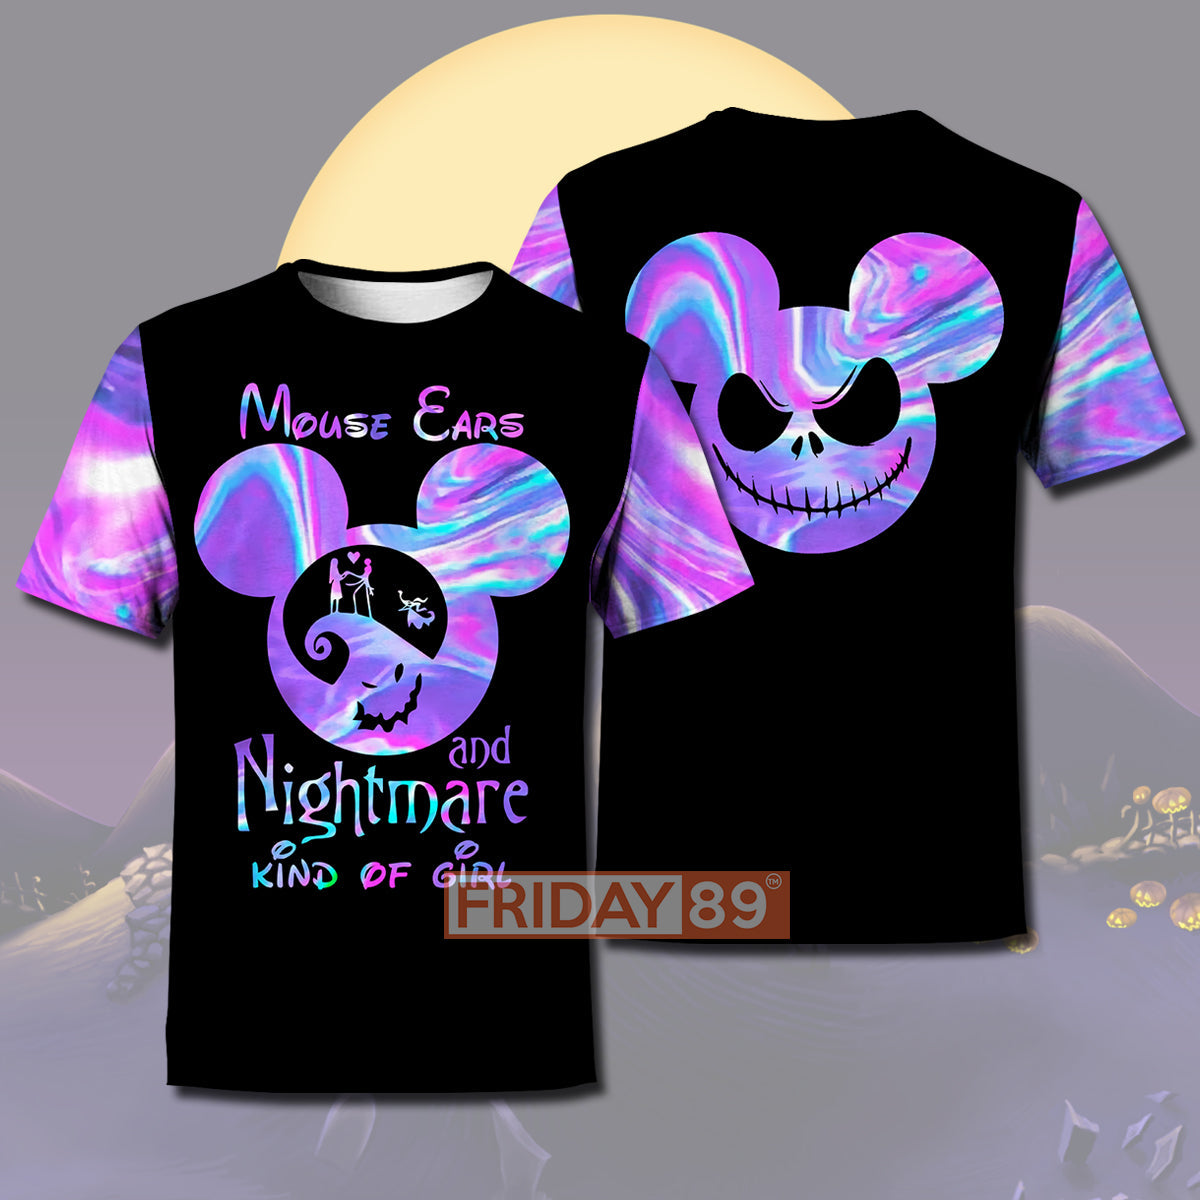 Unifinz DN T-shirt Mouse Ears And Nightmare Kind Of Girl 3D PRINT T-shirt Awesome High Quality DN TNBC Hoodie Sweater Tank 2025